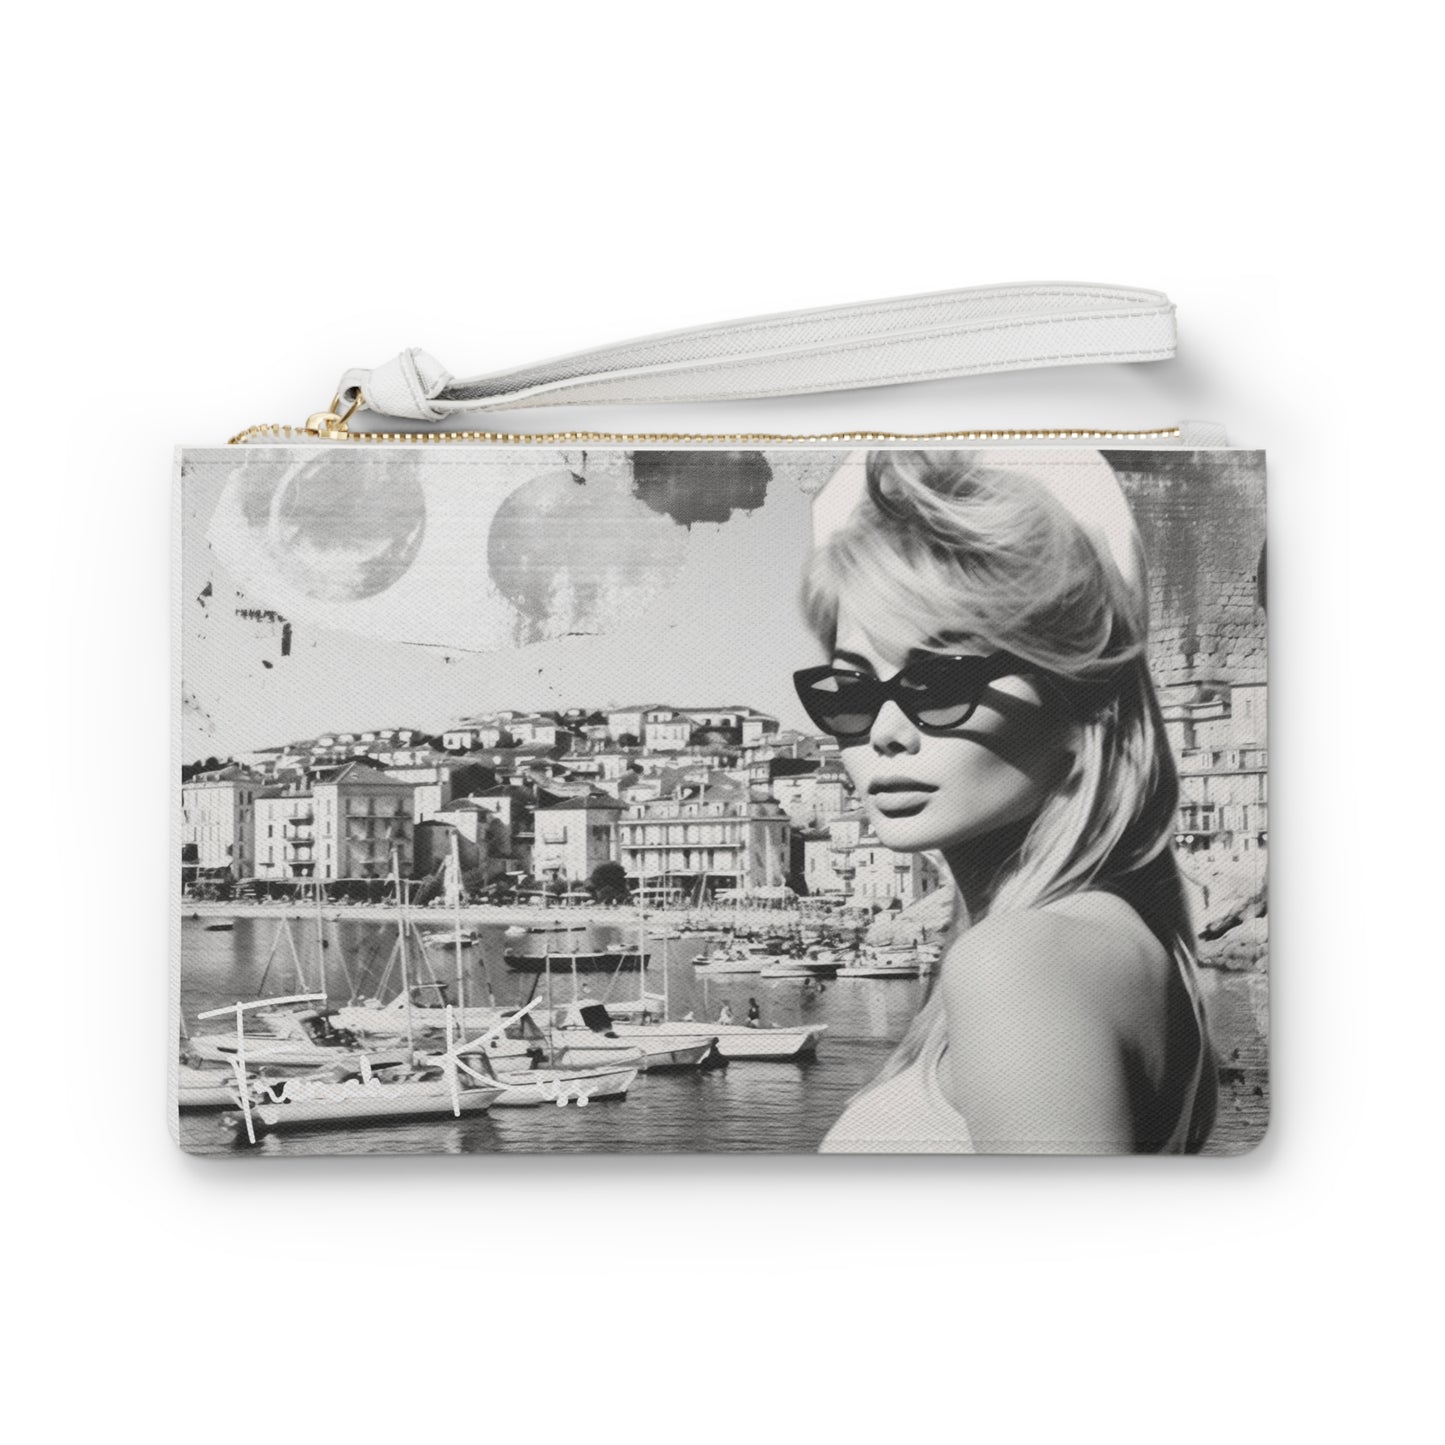 COTE D'AZUR French Kiss Pop Art, Sexy, Sassy CLUTCH Bag, France Couture, Travel, Fashion, Luxury, Chic French designer, must have gift item